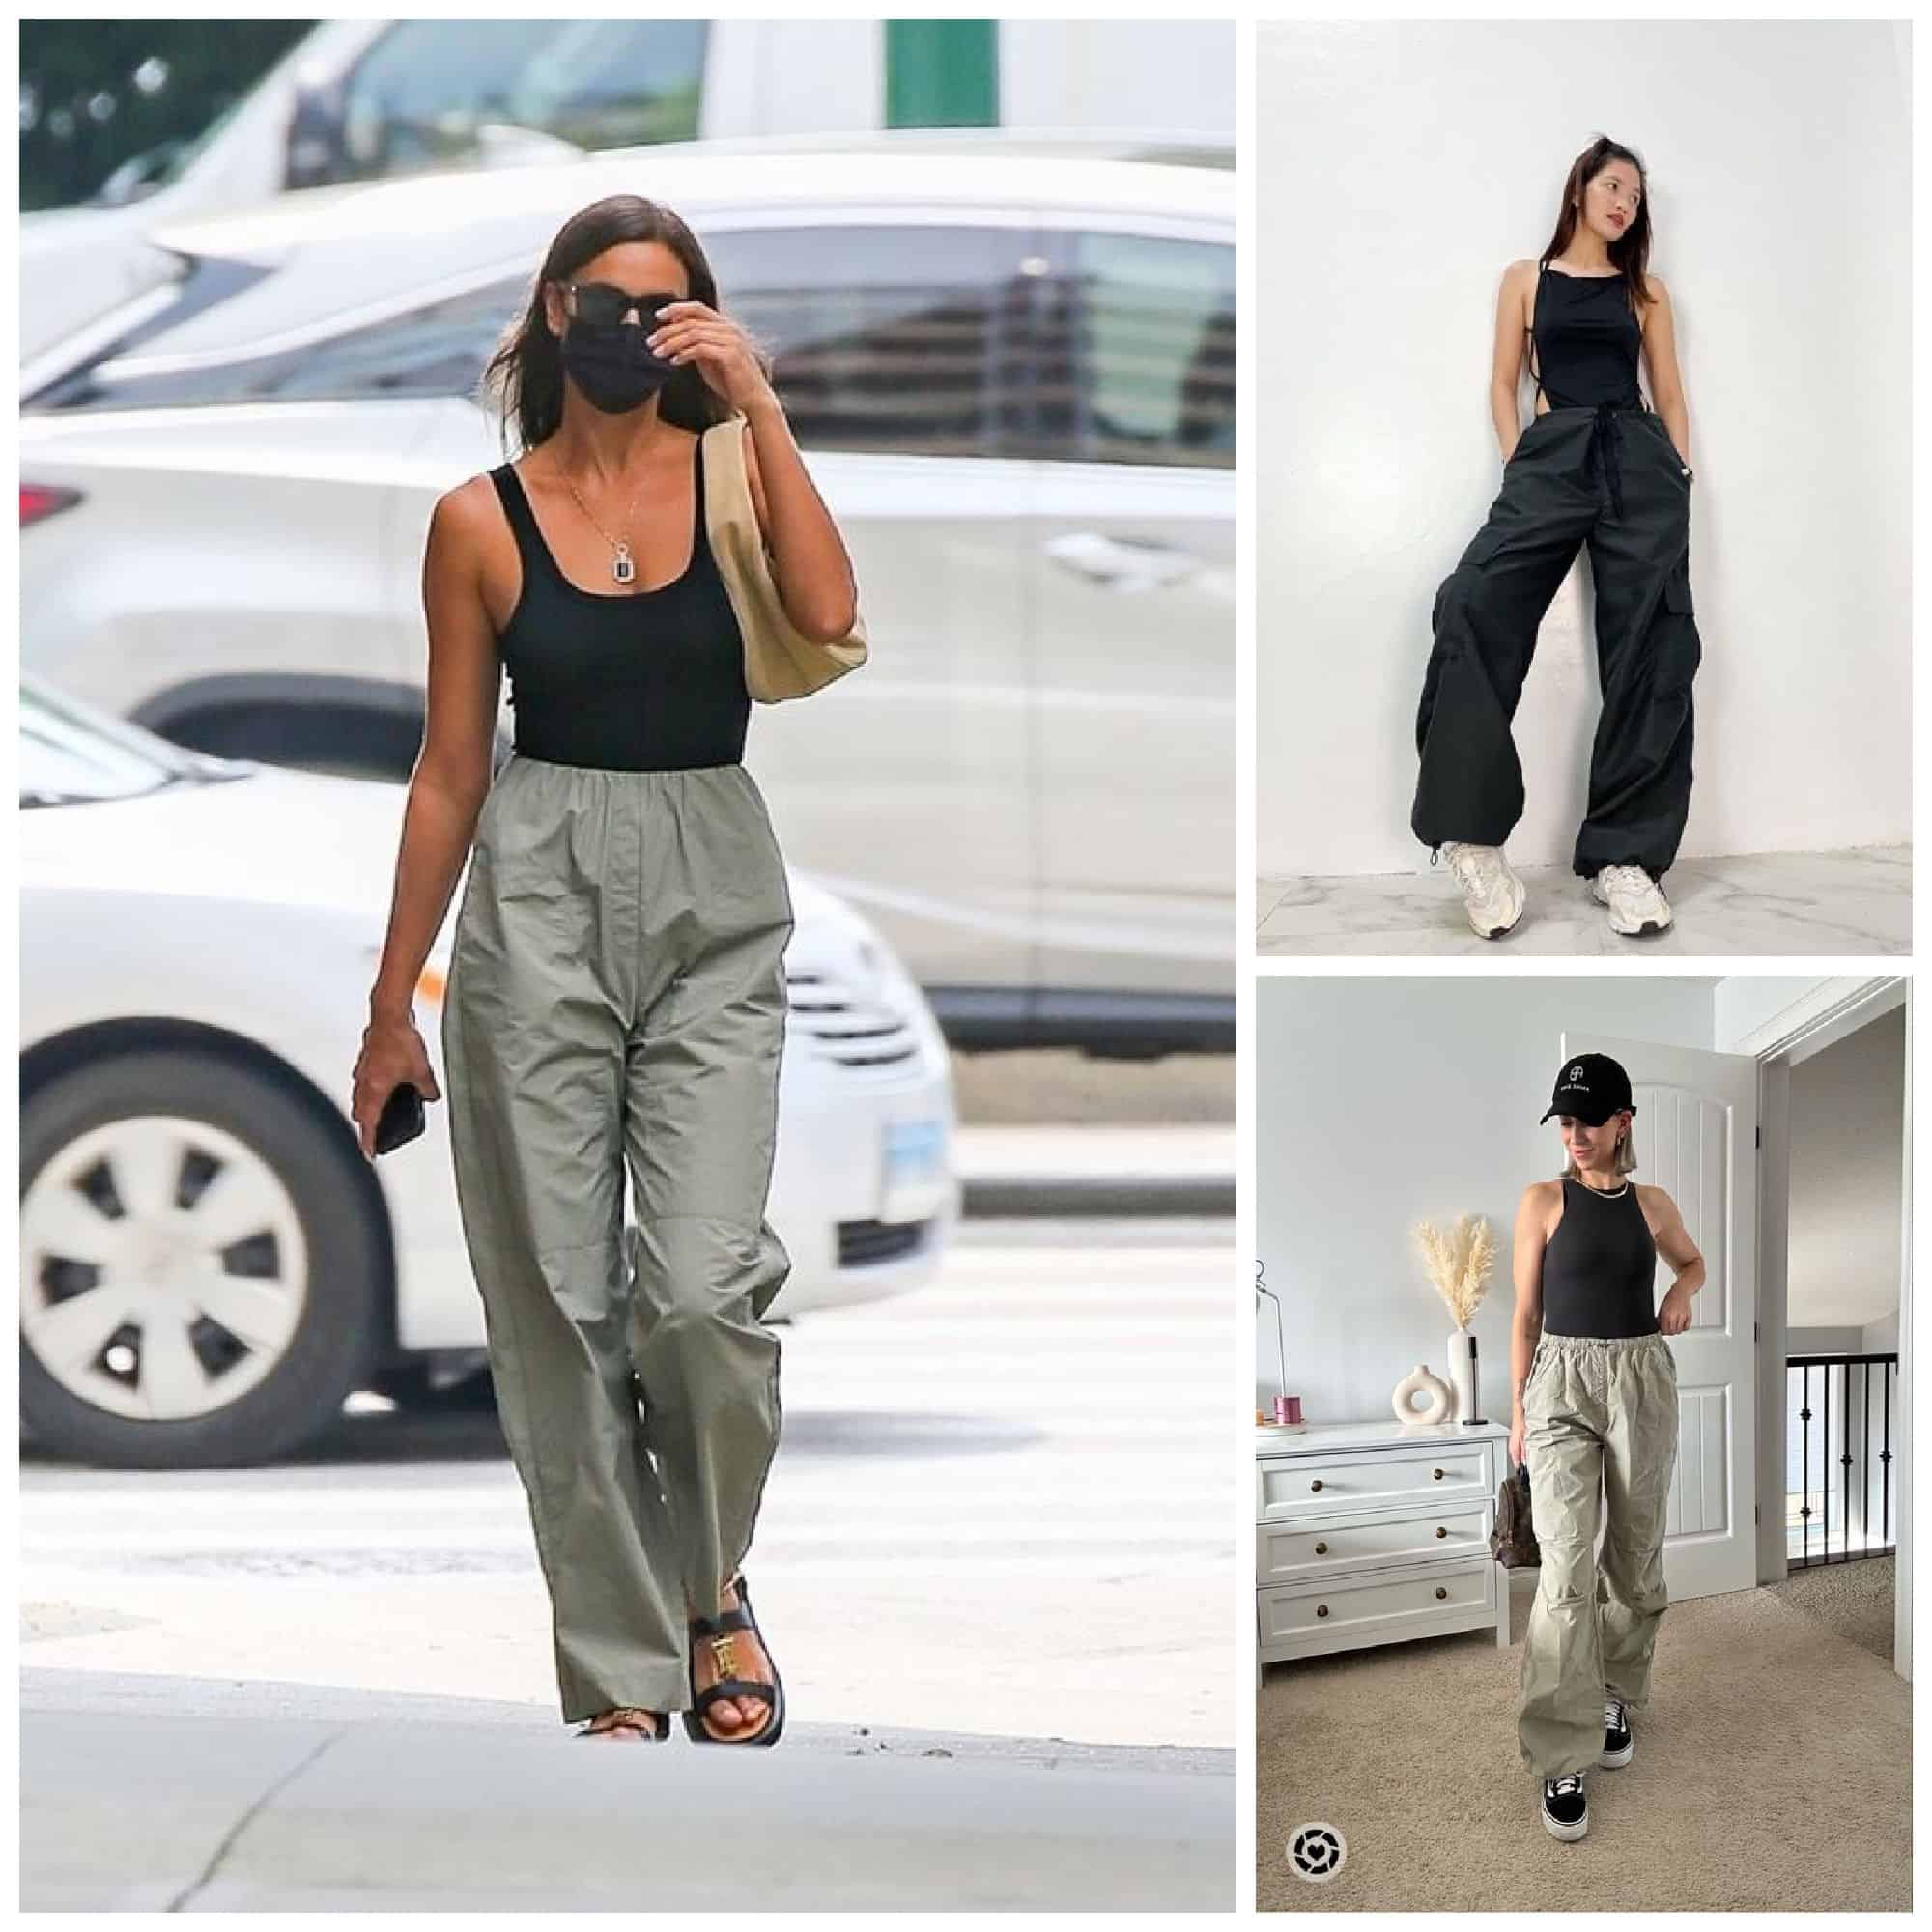 Skinny Jeans Is The Fashion Item You Should Leave Behind In 2023 – Here's  Why! - Exquisite Magazine - Fashion, Beauty and Lifestyle